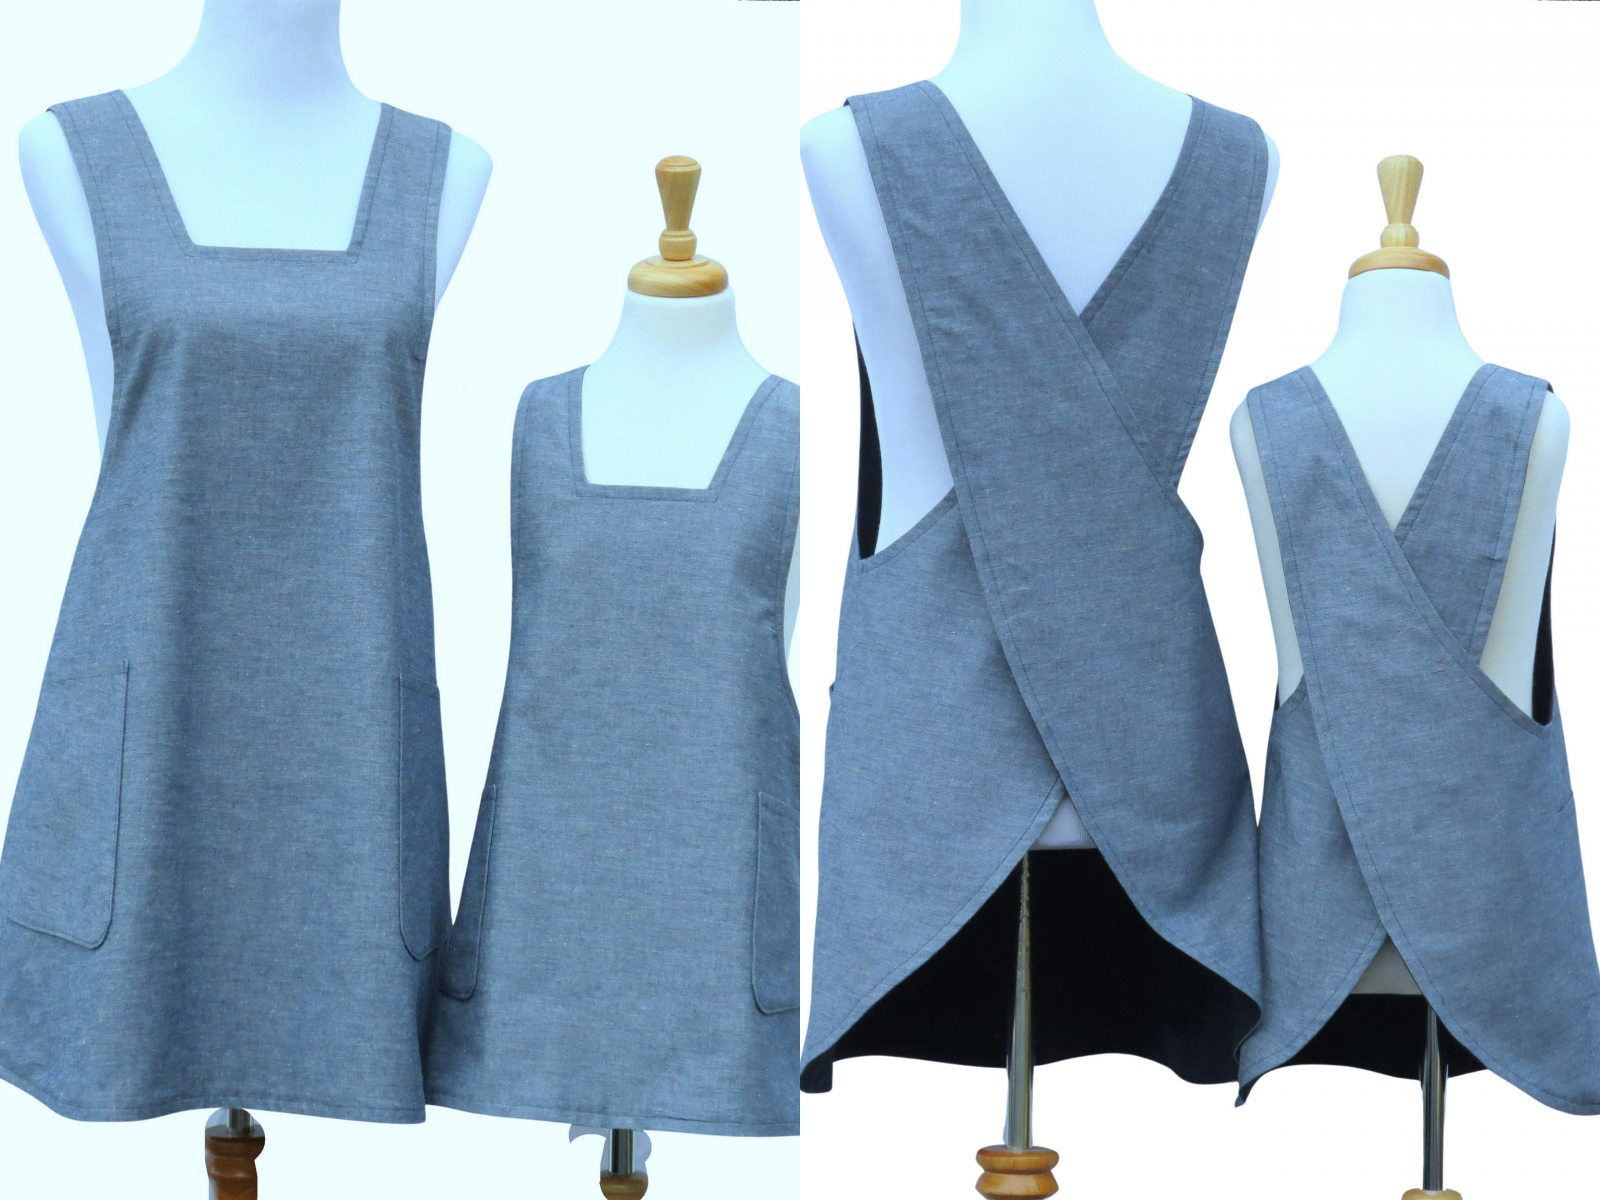 https://www.stitchedbybeverly.com/sites/stitchedbybeverly.indiemade.com/files/imagecache/im_clientsite_product_zoom/mother_daughter_blue_chambray_aprons_front_back_views.jpg